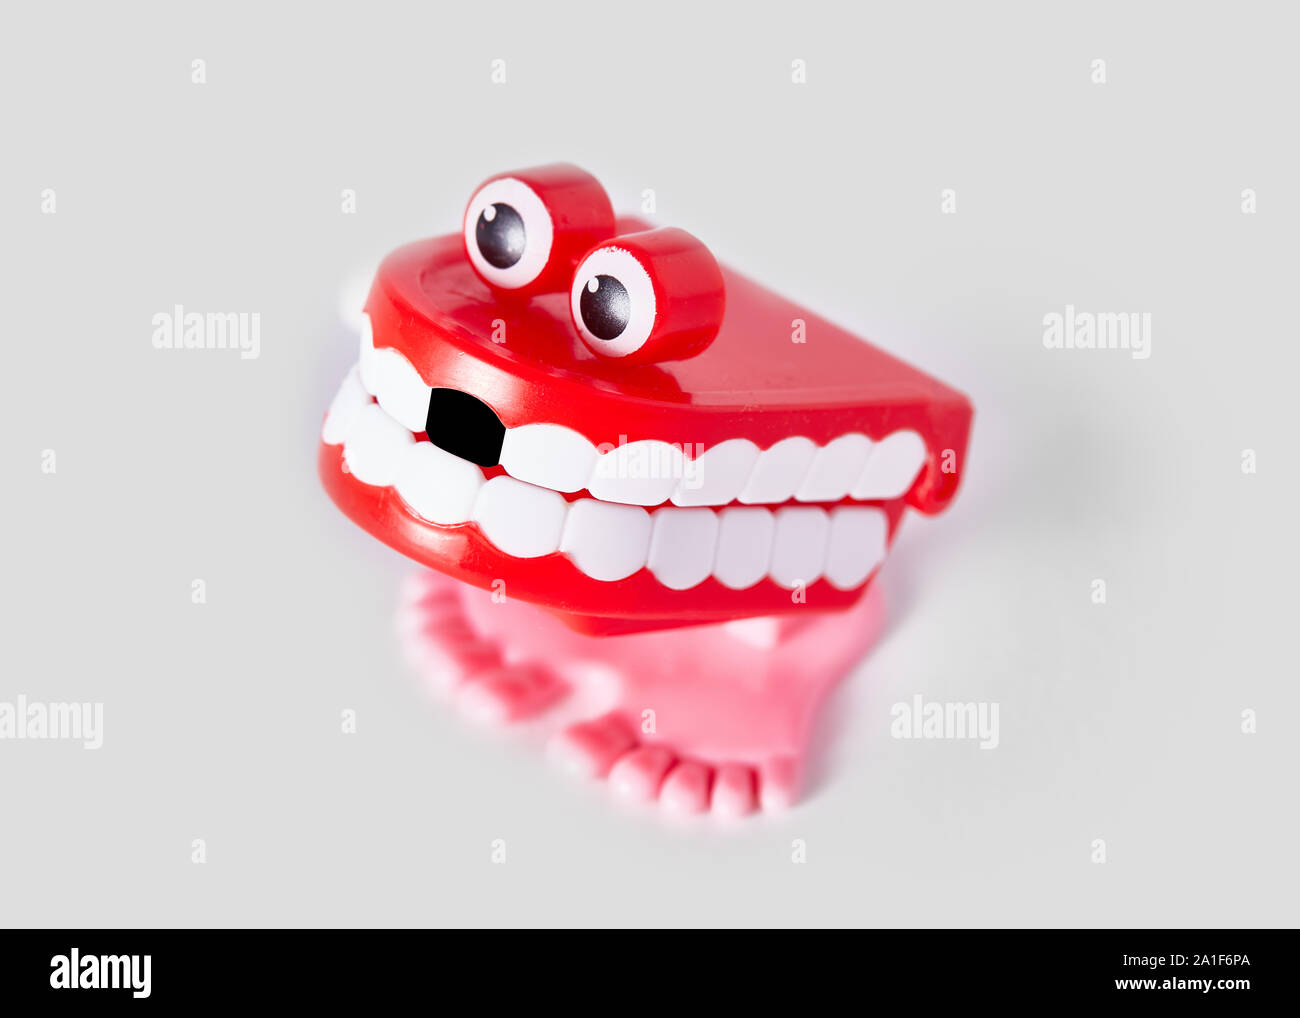 Chattering teeth toy Stock Photo